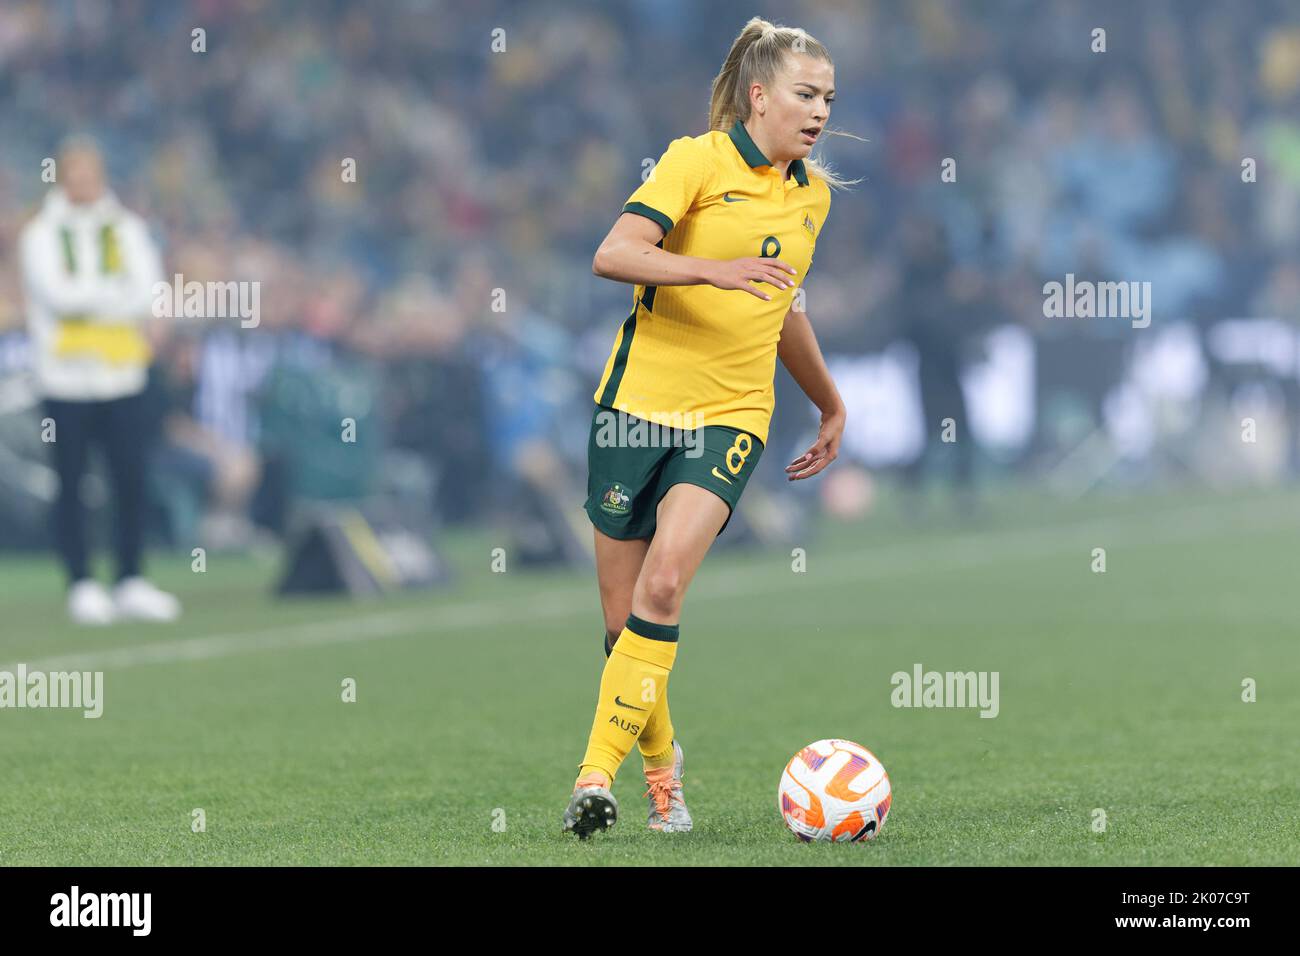 SYDNEY, AUSTRALIA - SEPTEMBER 6: Charlotte Grant of Australia running with the ball during the International Friendly Match between Australia and Cana Stock Photo